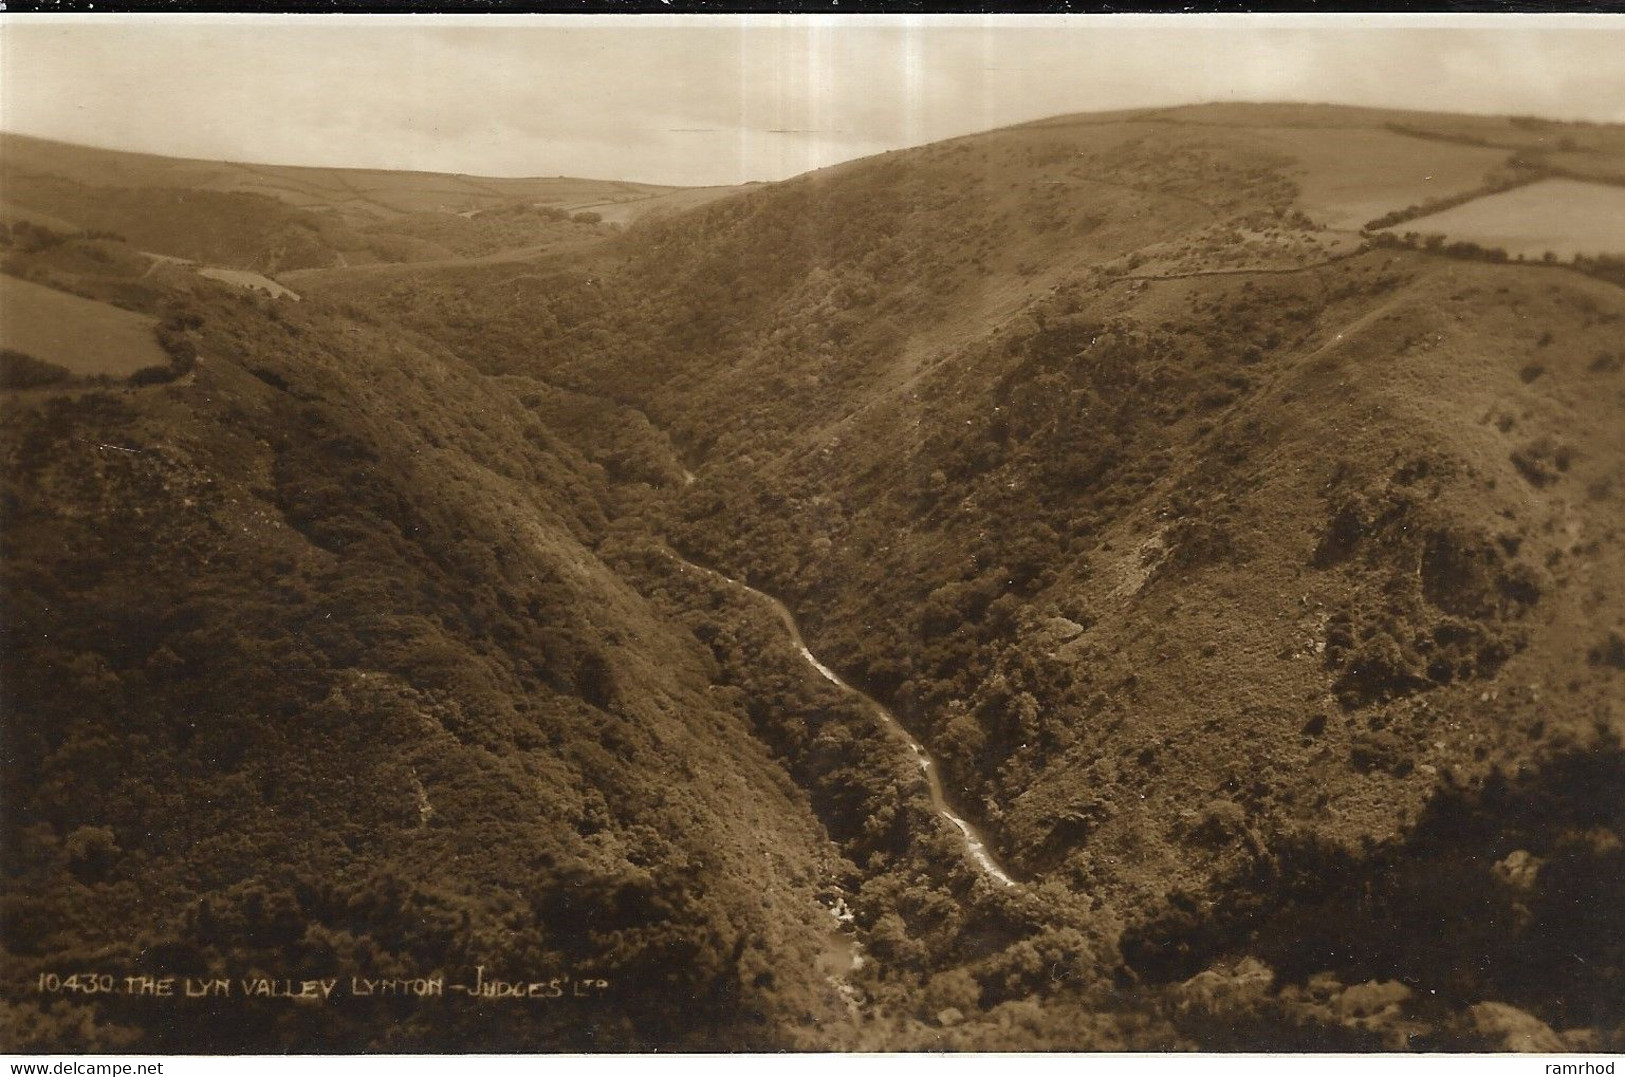 LYNTON, The Lyn Valley (Publisher - Judges) Date - Unknown, Unused - Lynmouth & Lynton